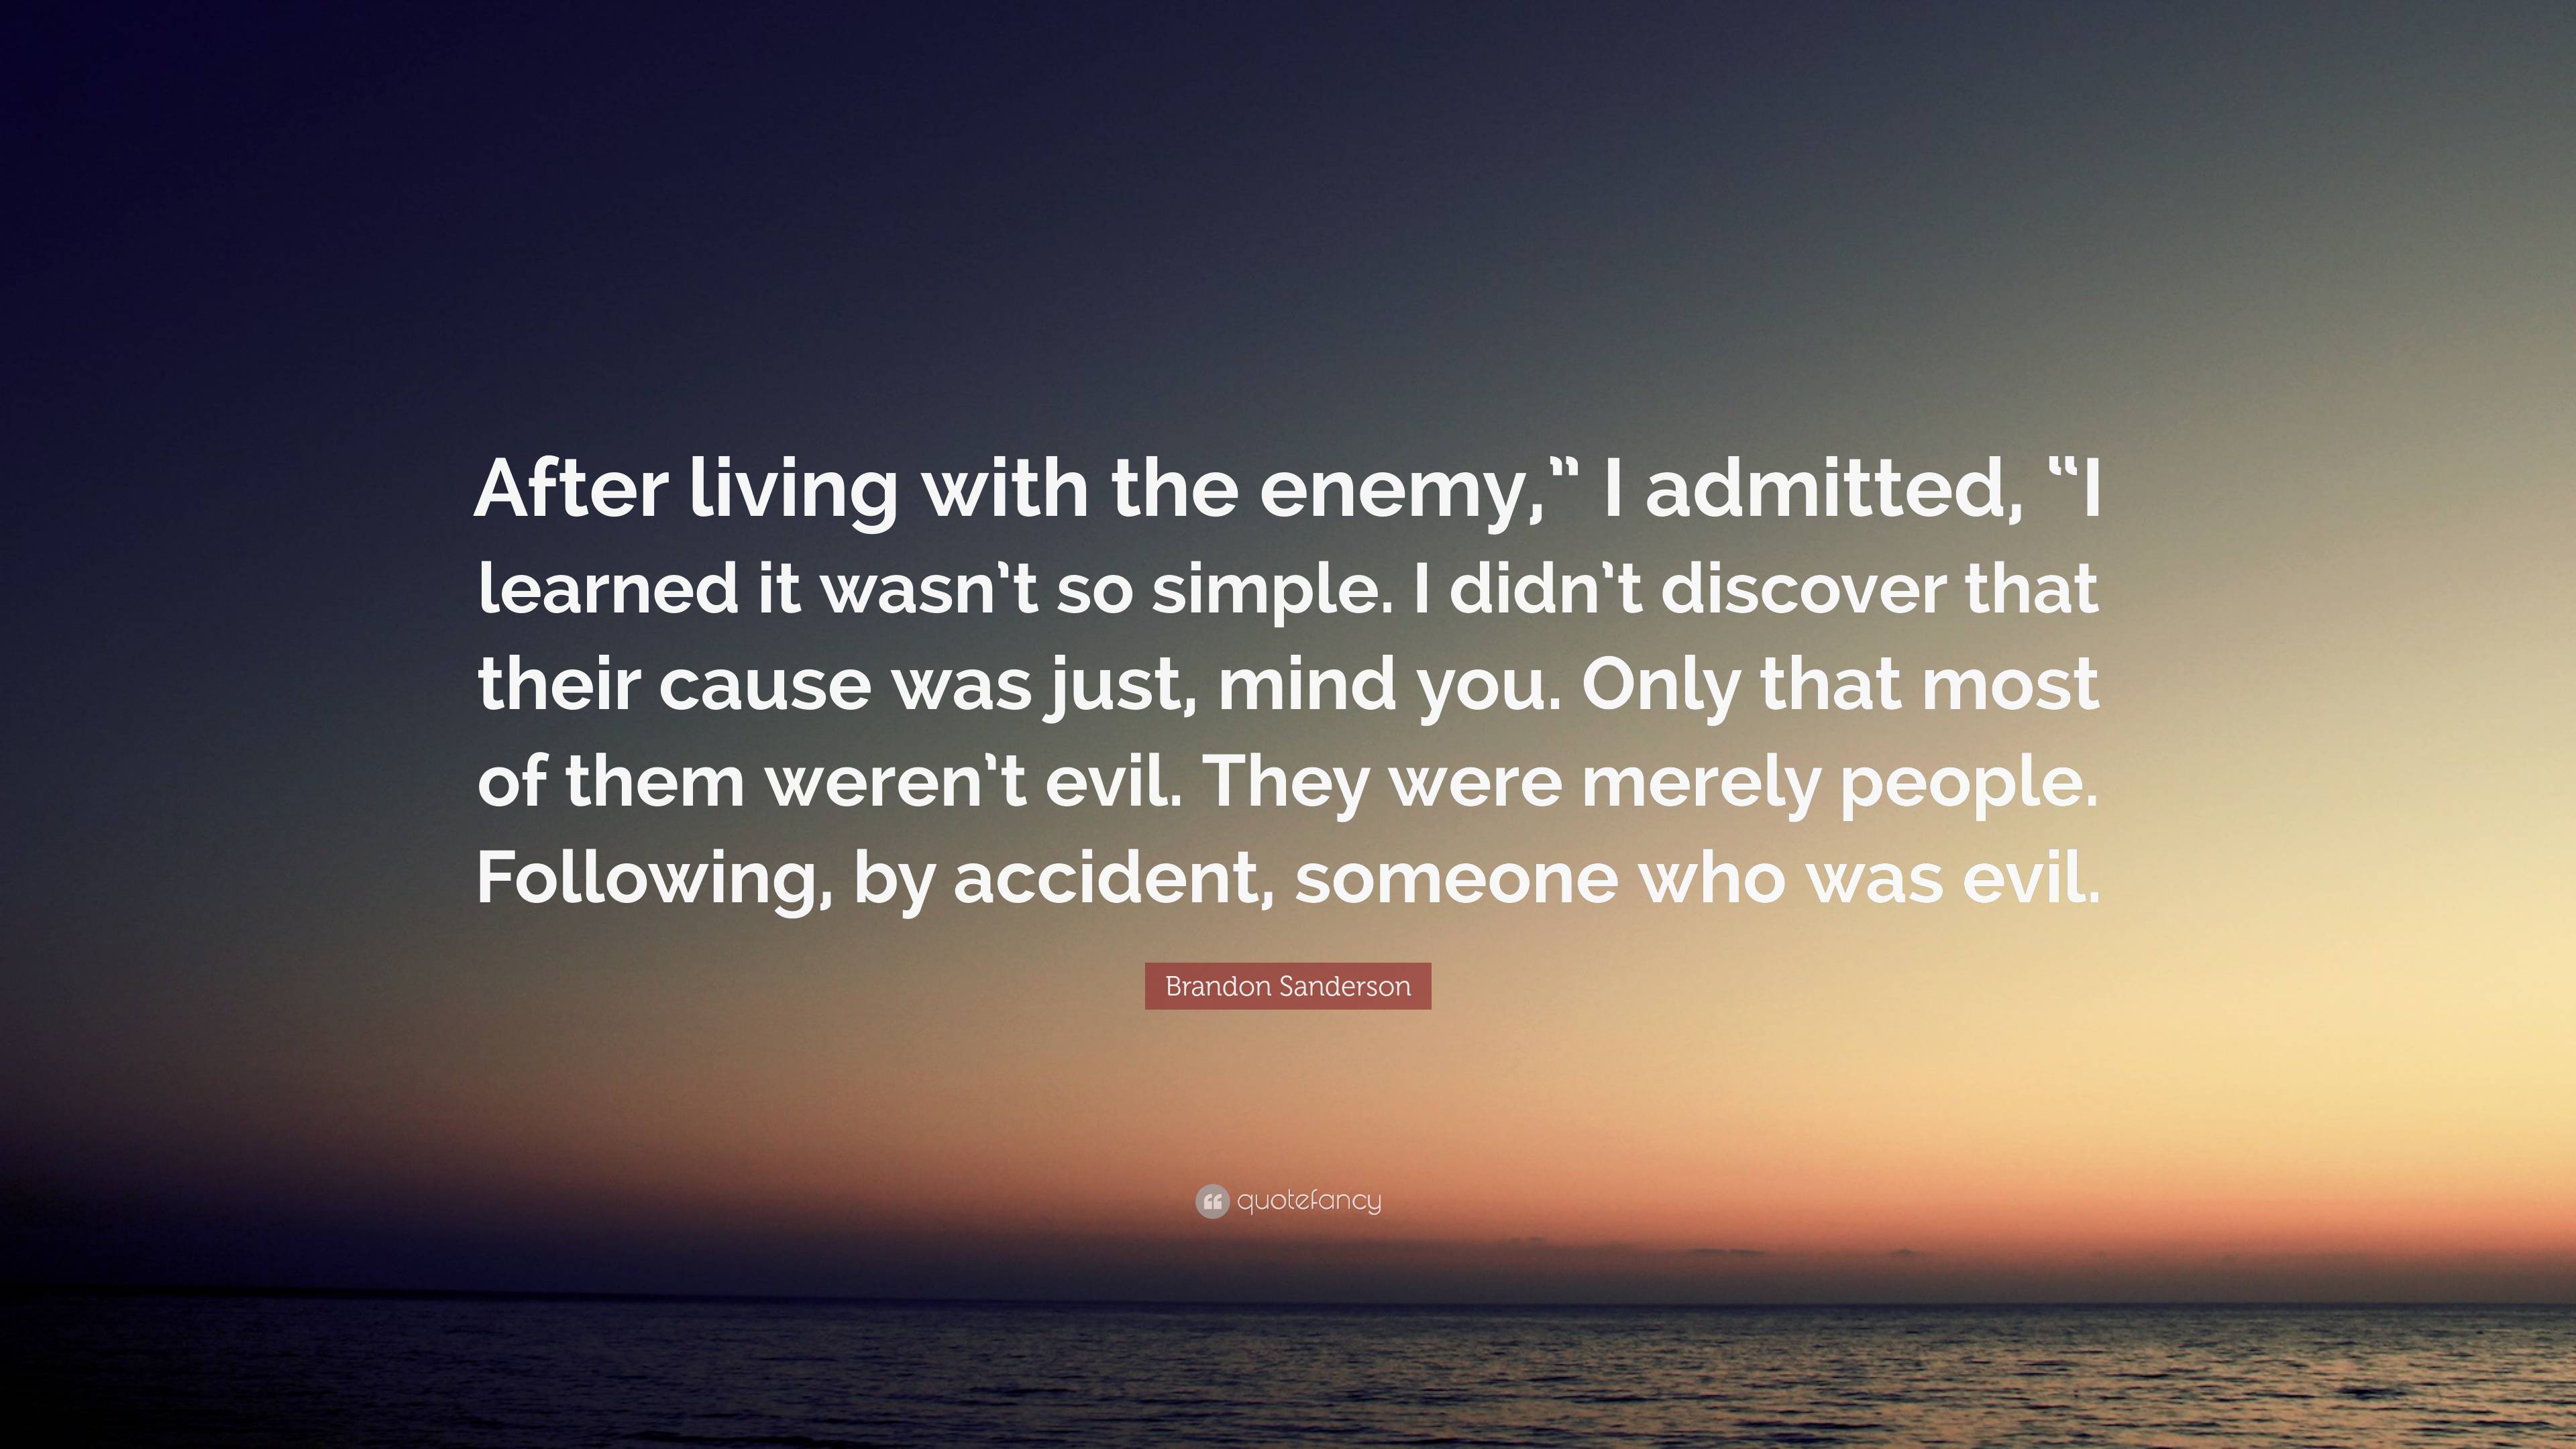 https://quotefancy.com/media/wallpaper/3840x2160/7311471-Brandon-Sanderson-Quote-After-living-with-the-enemy-I-admitted-I.jpg